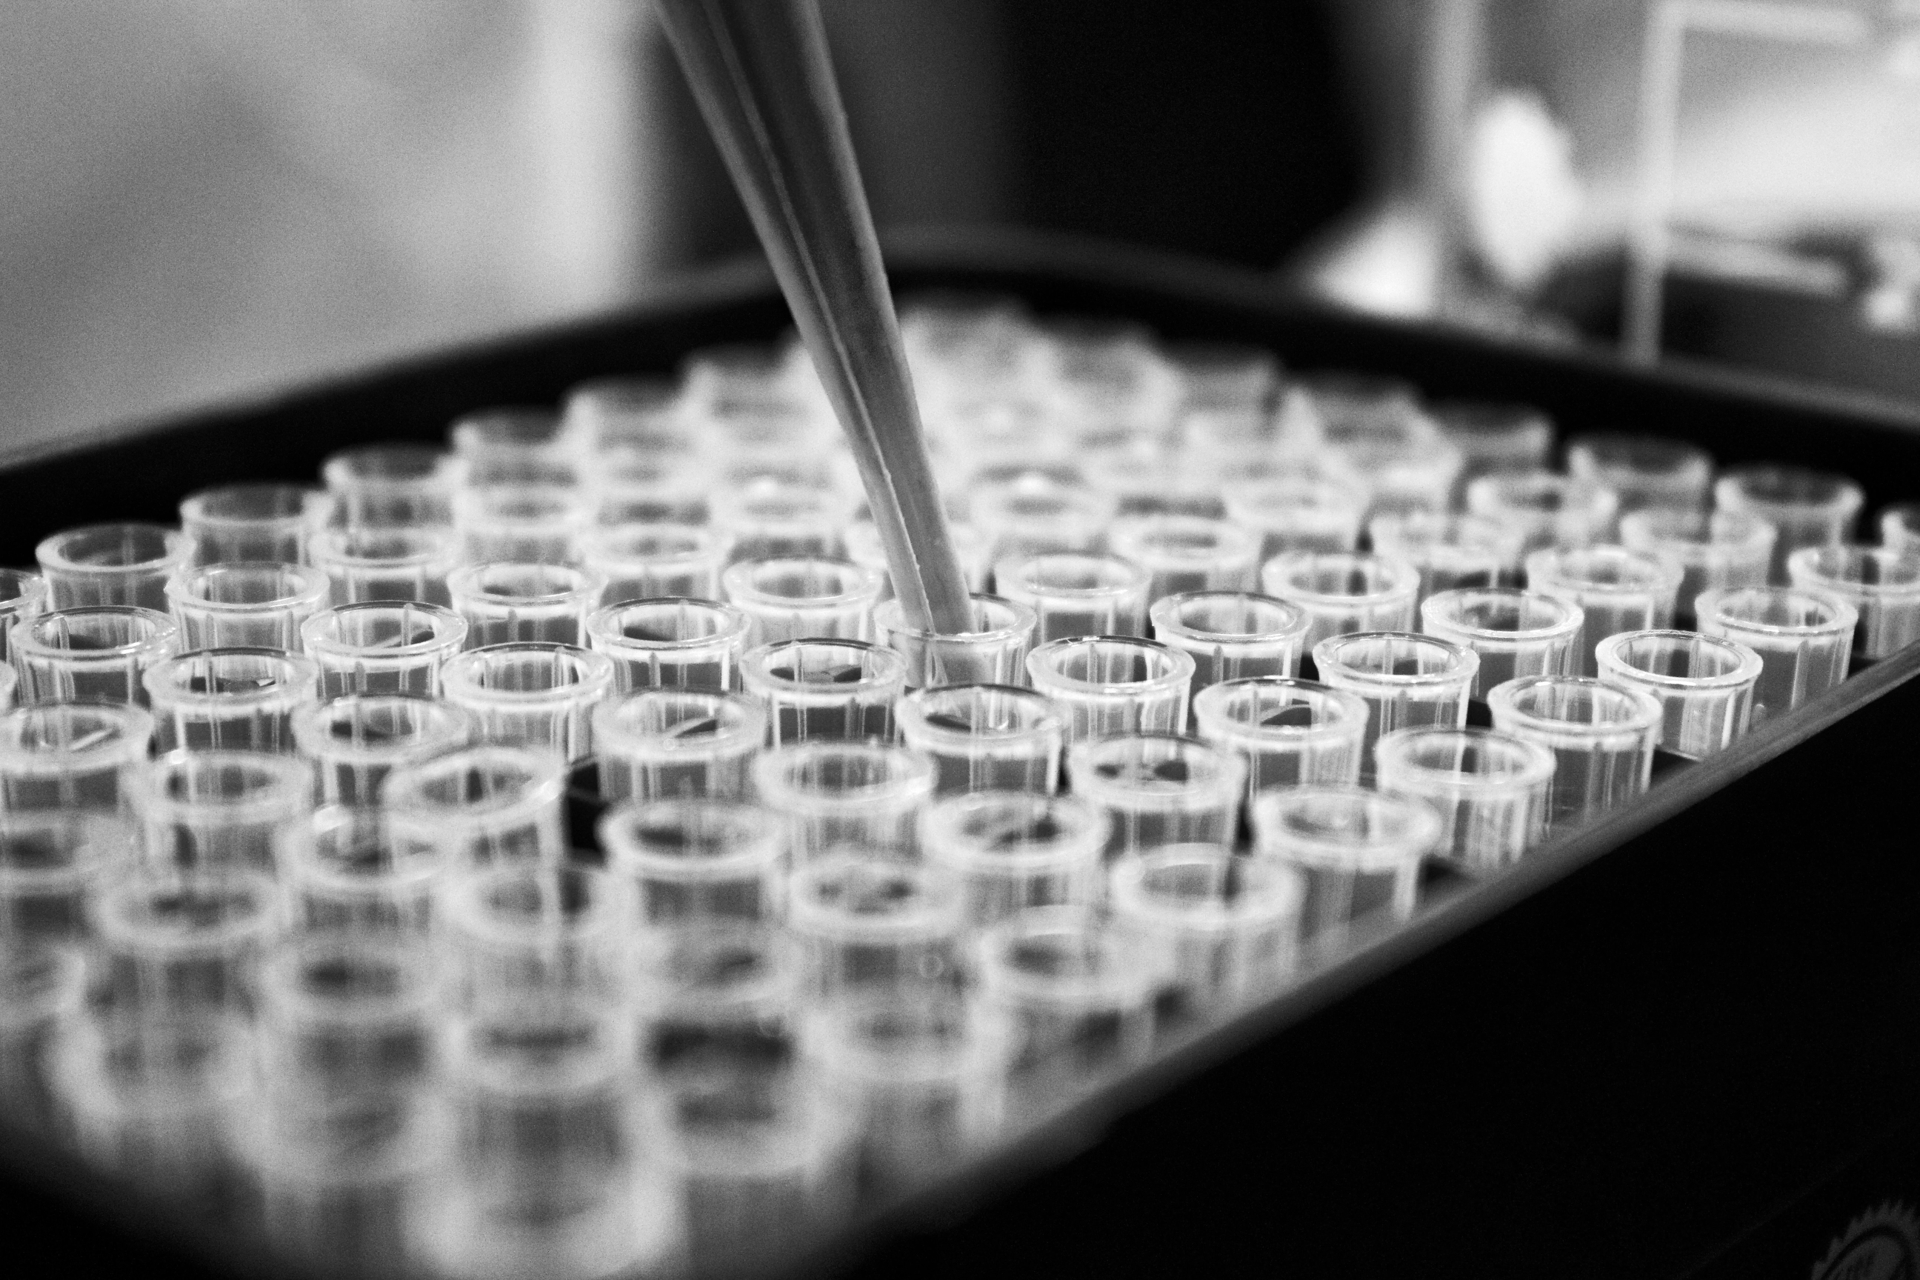 A pipette dipping into test tubes in close-up